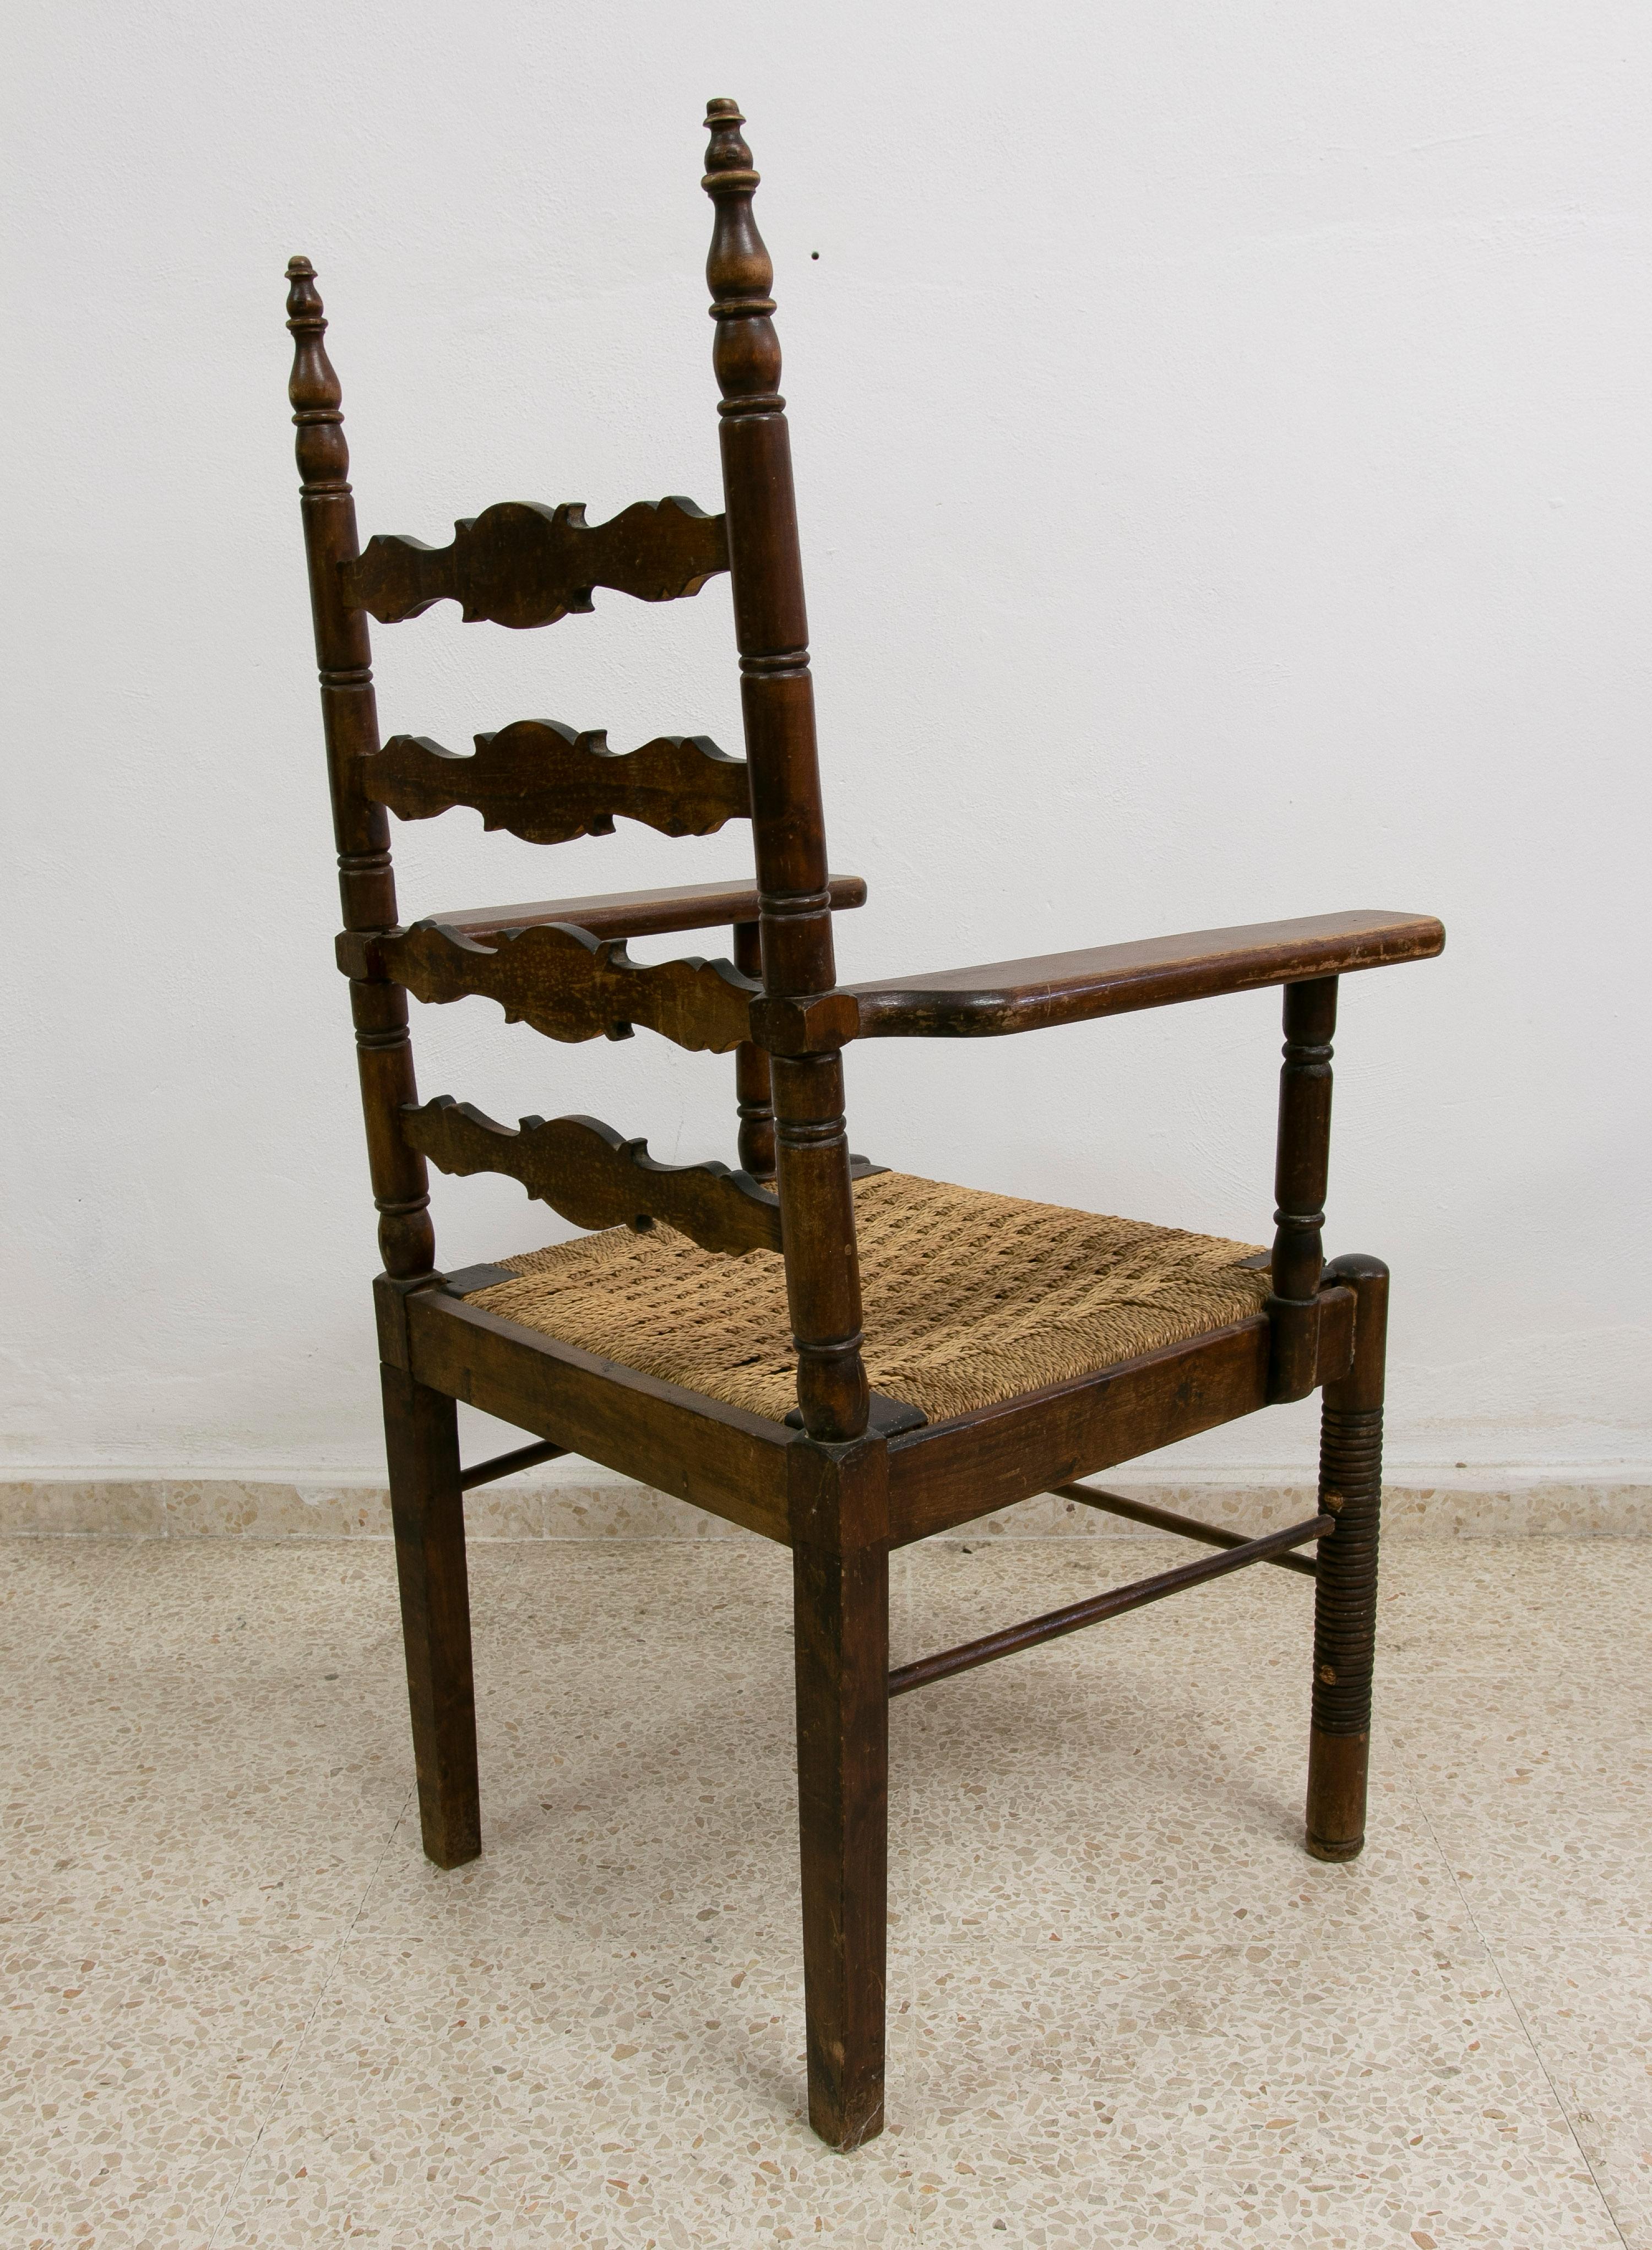 20th Century 1930s Spanish Andalusian Flamenco Set of 8-Chairs & 2-Armchairs w/ Bulrush Seats For Sale